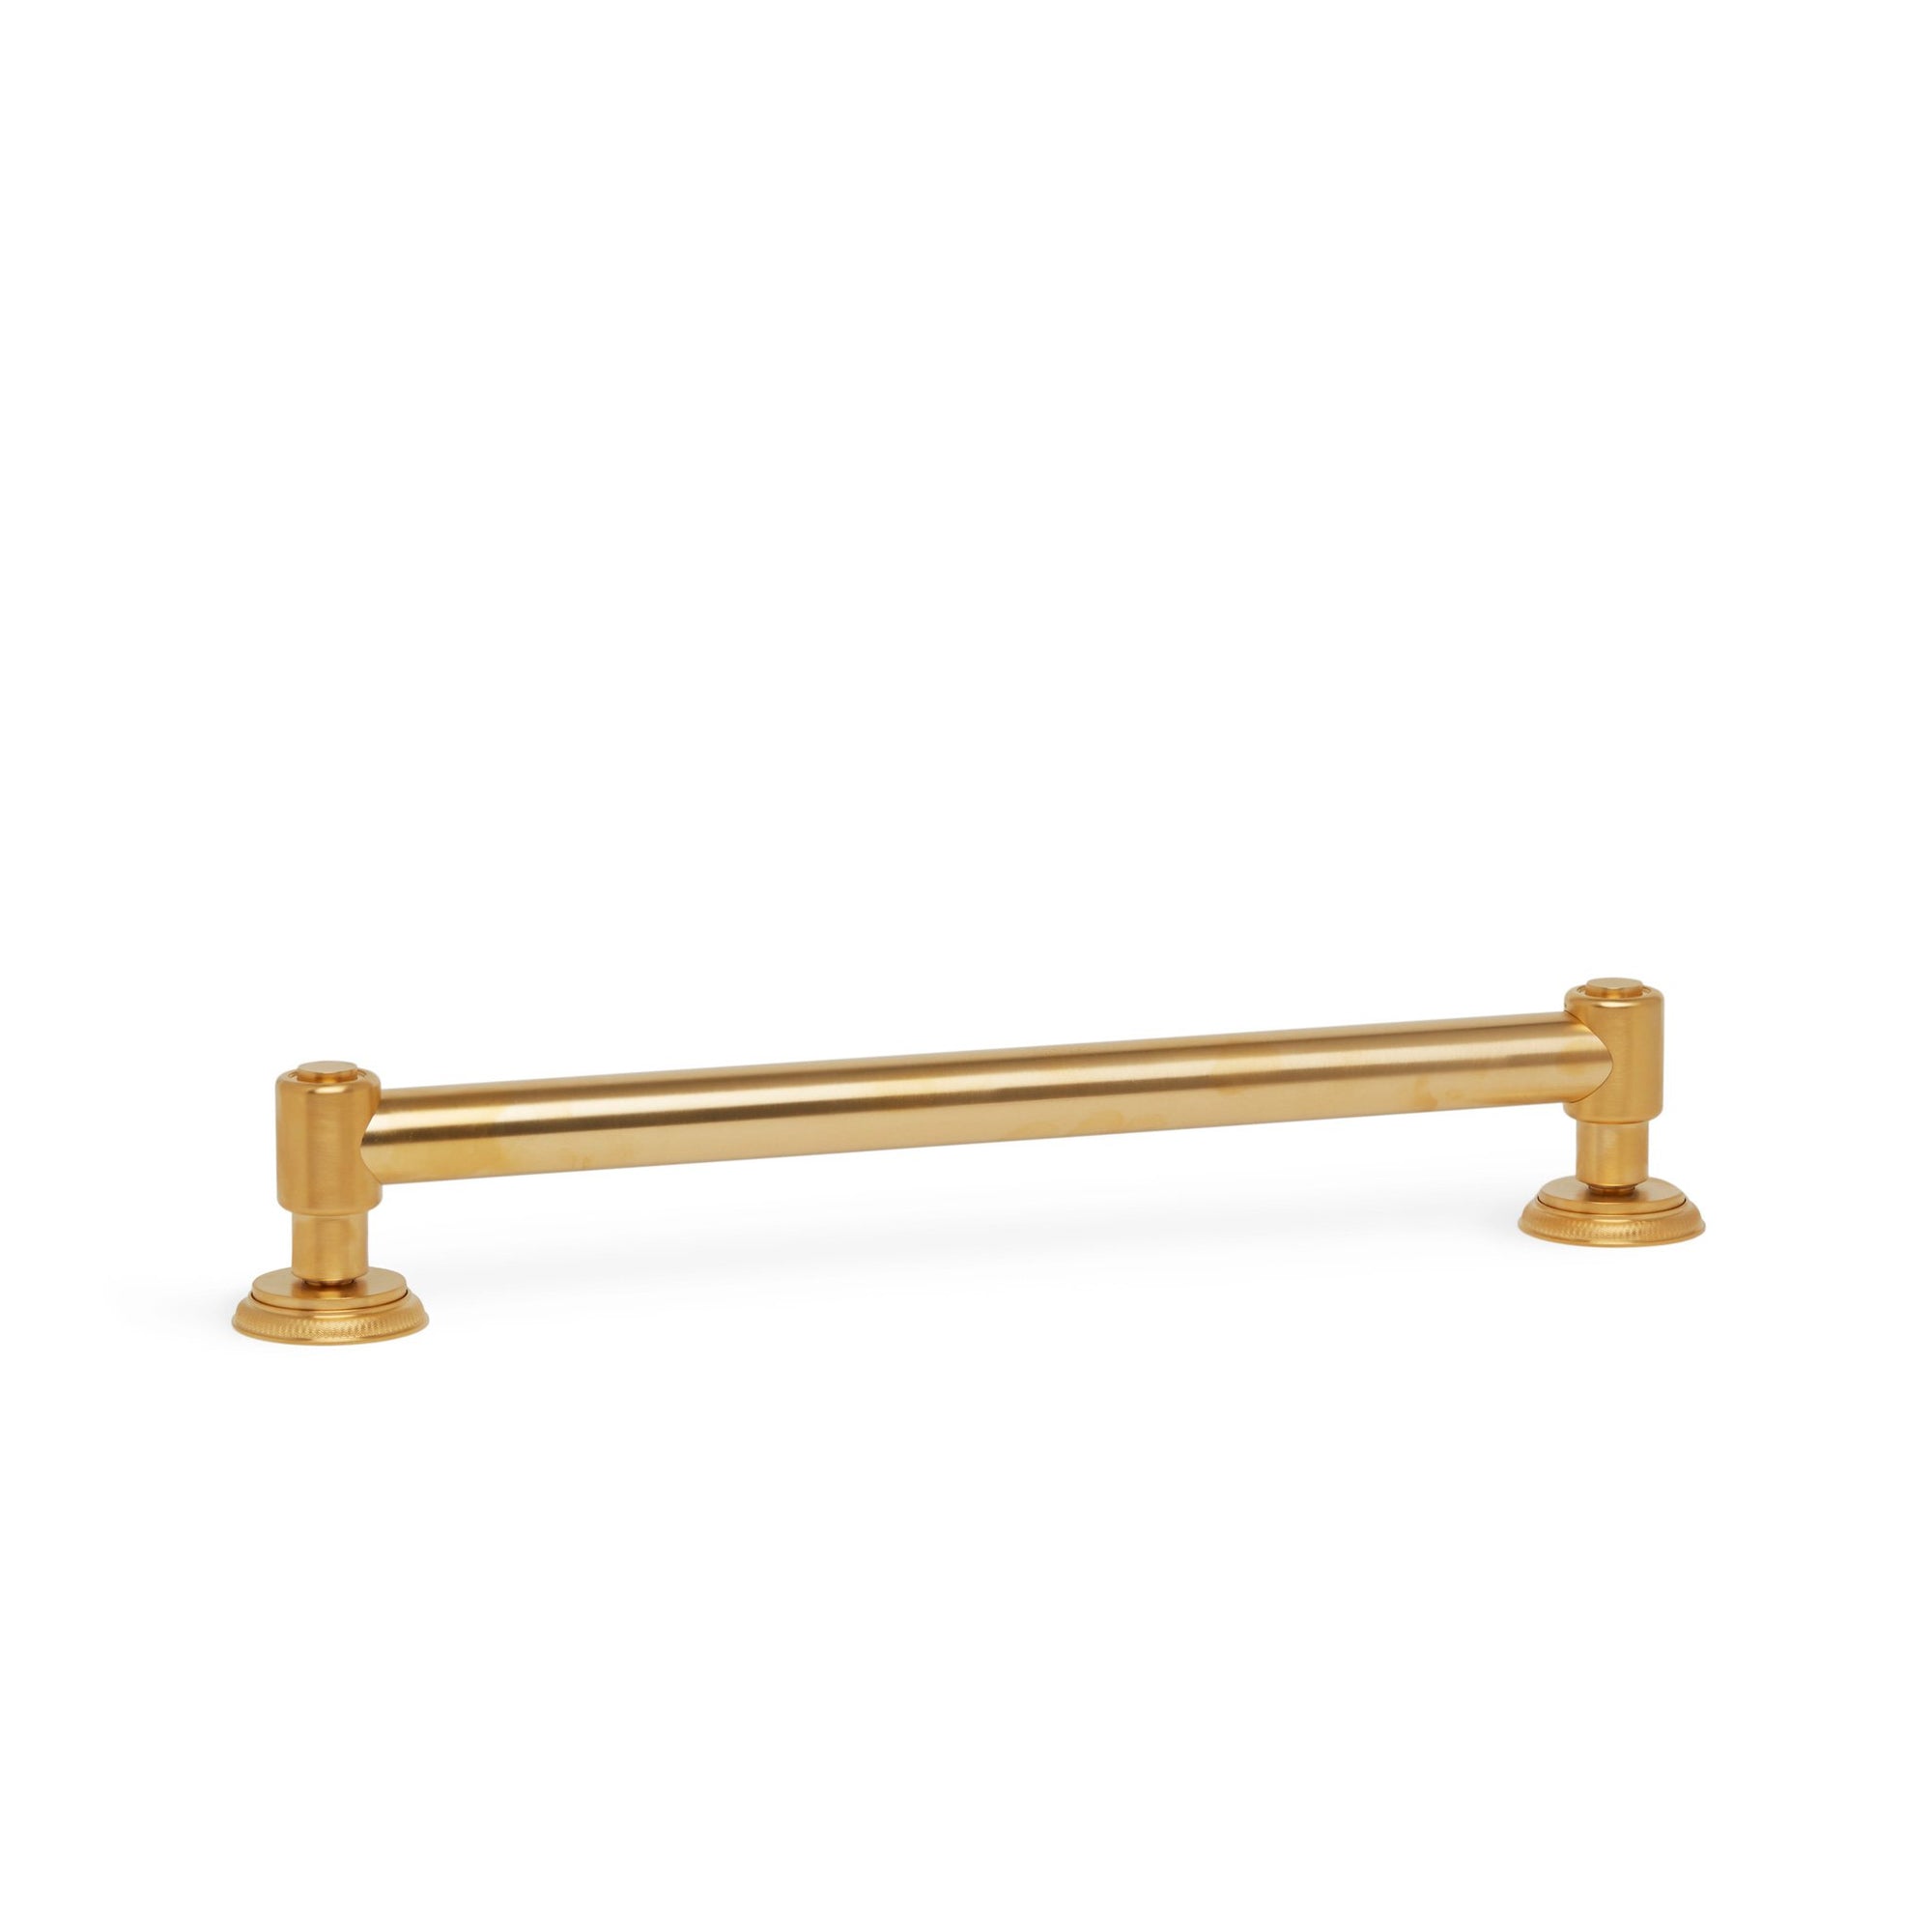 3695GB-MLIN-GP Sherle Wagner International Knurled Grab Bar with Metal insert in Gold Plate metal finish